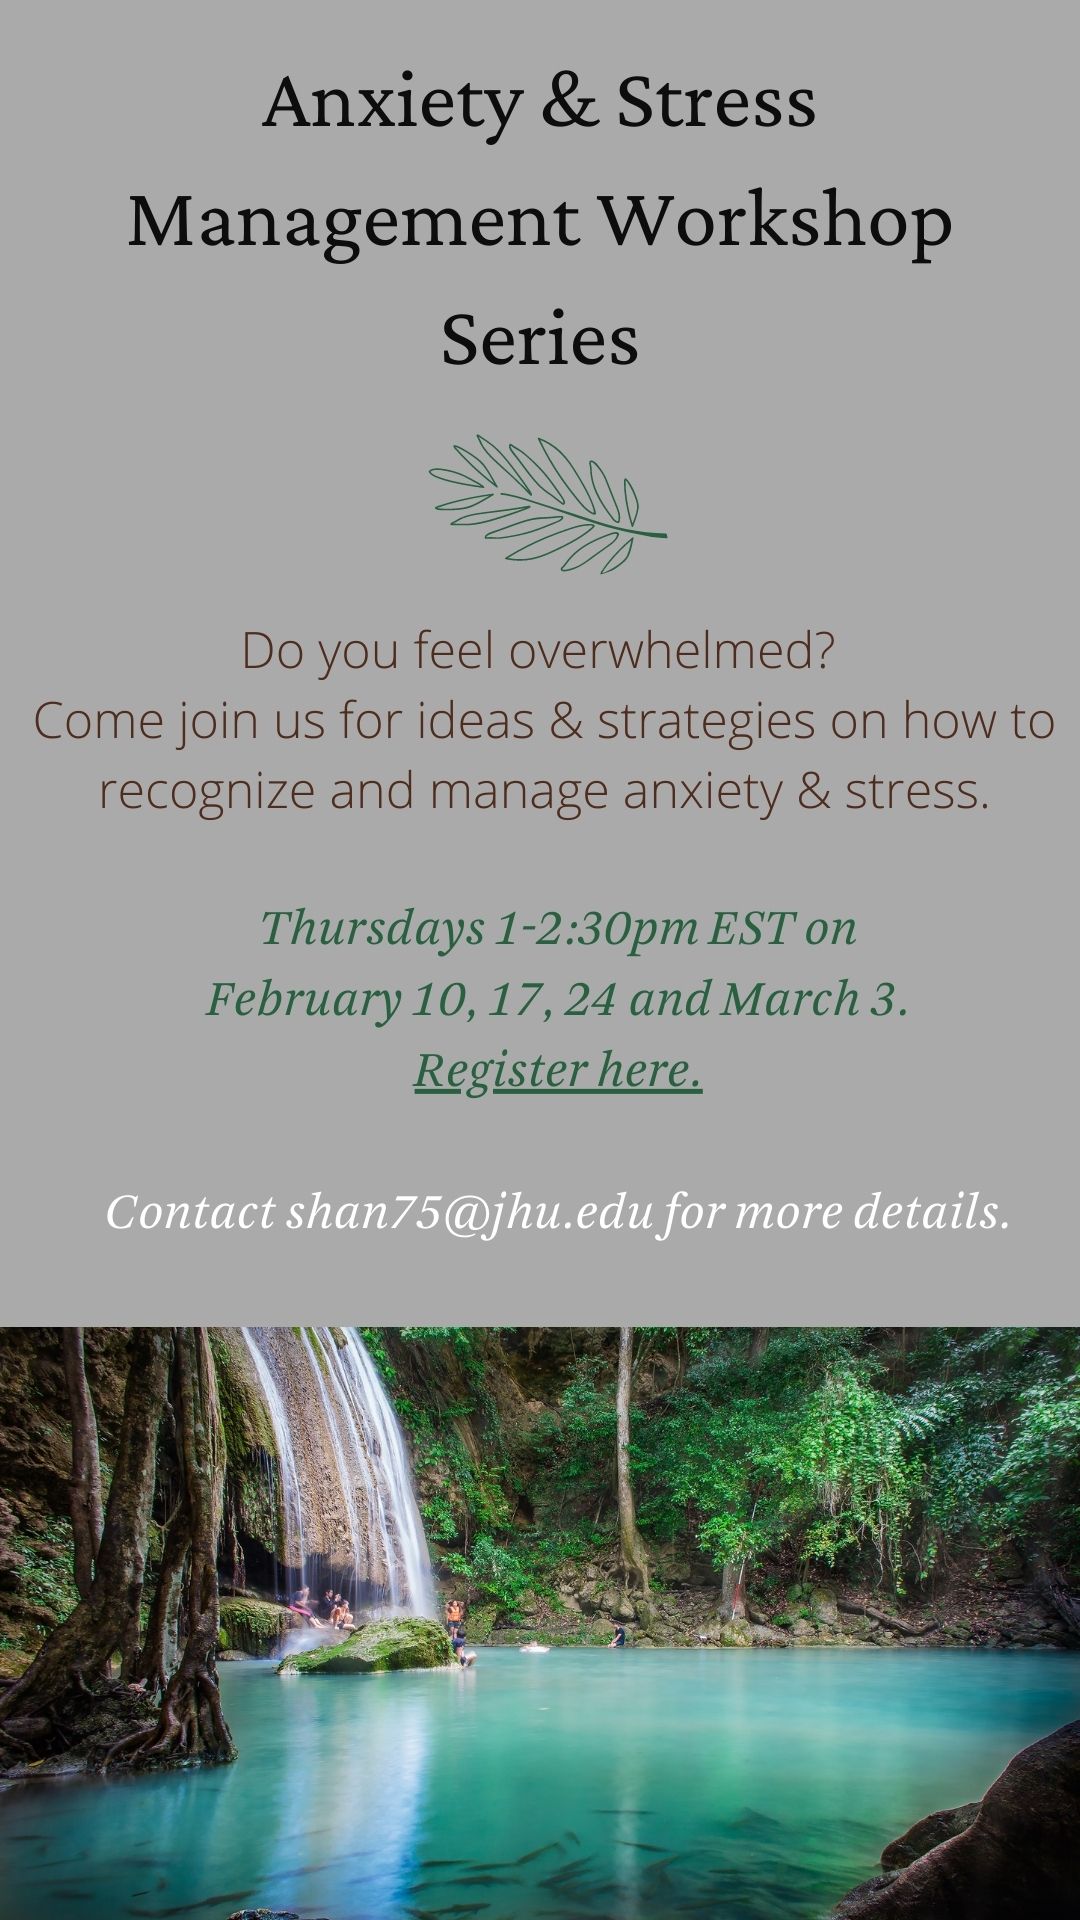 Anxiety and Stress Management - Workshop series | Counseling Center